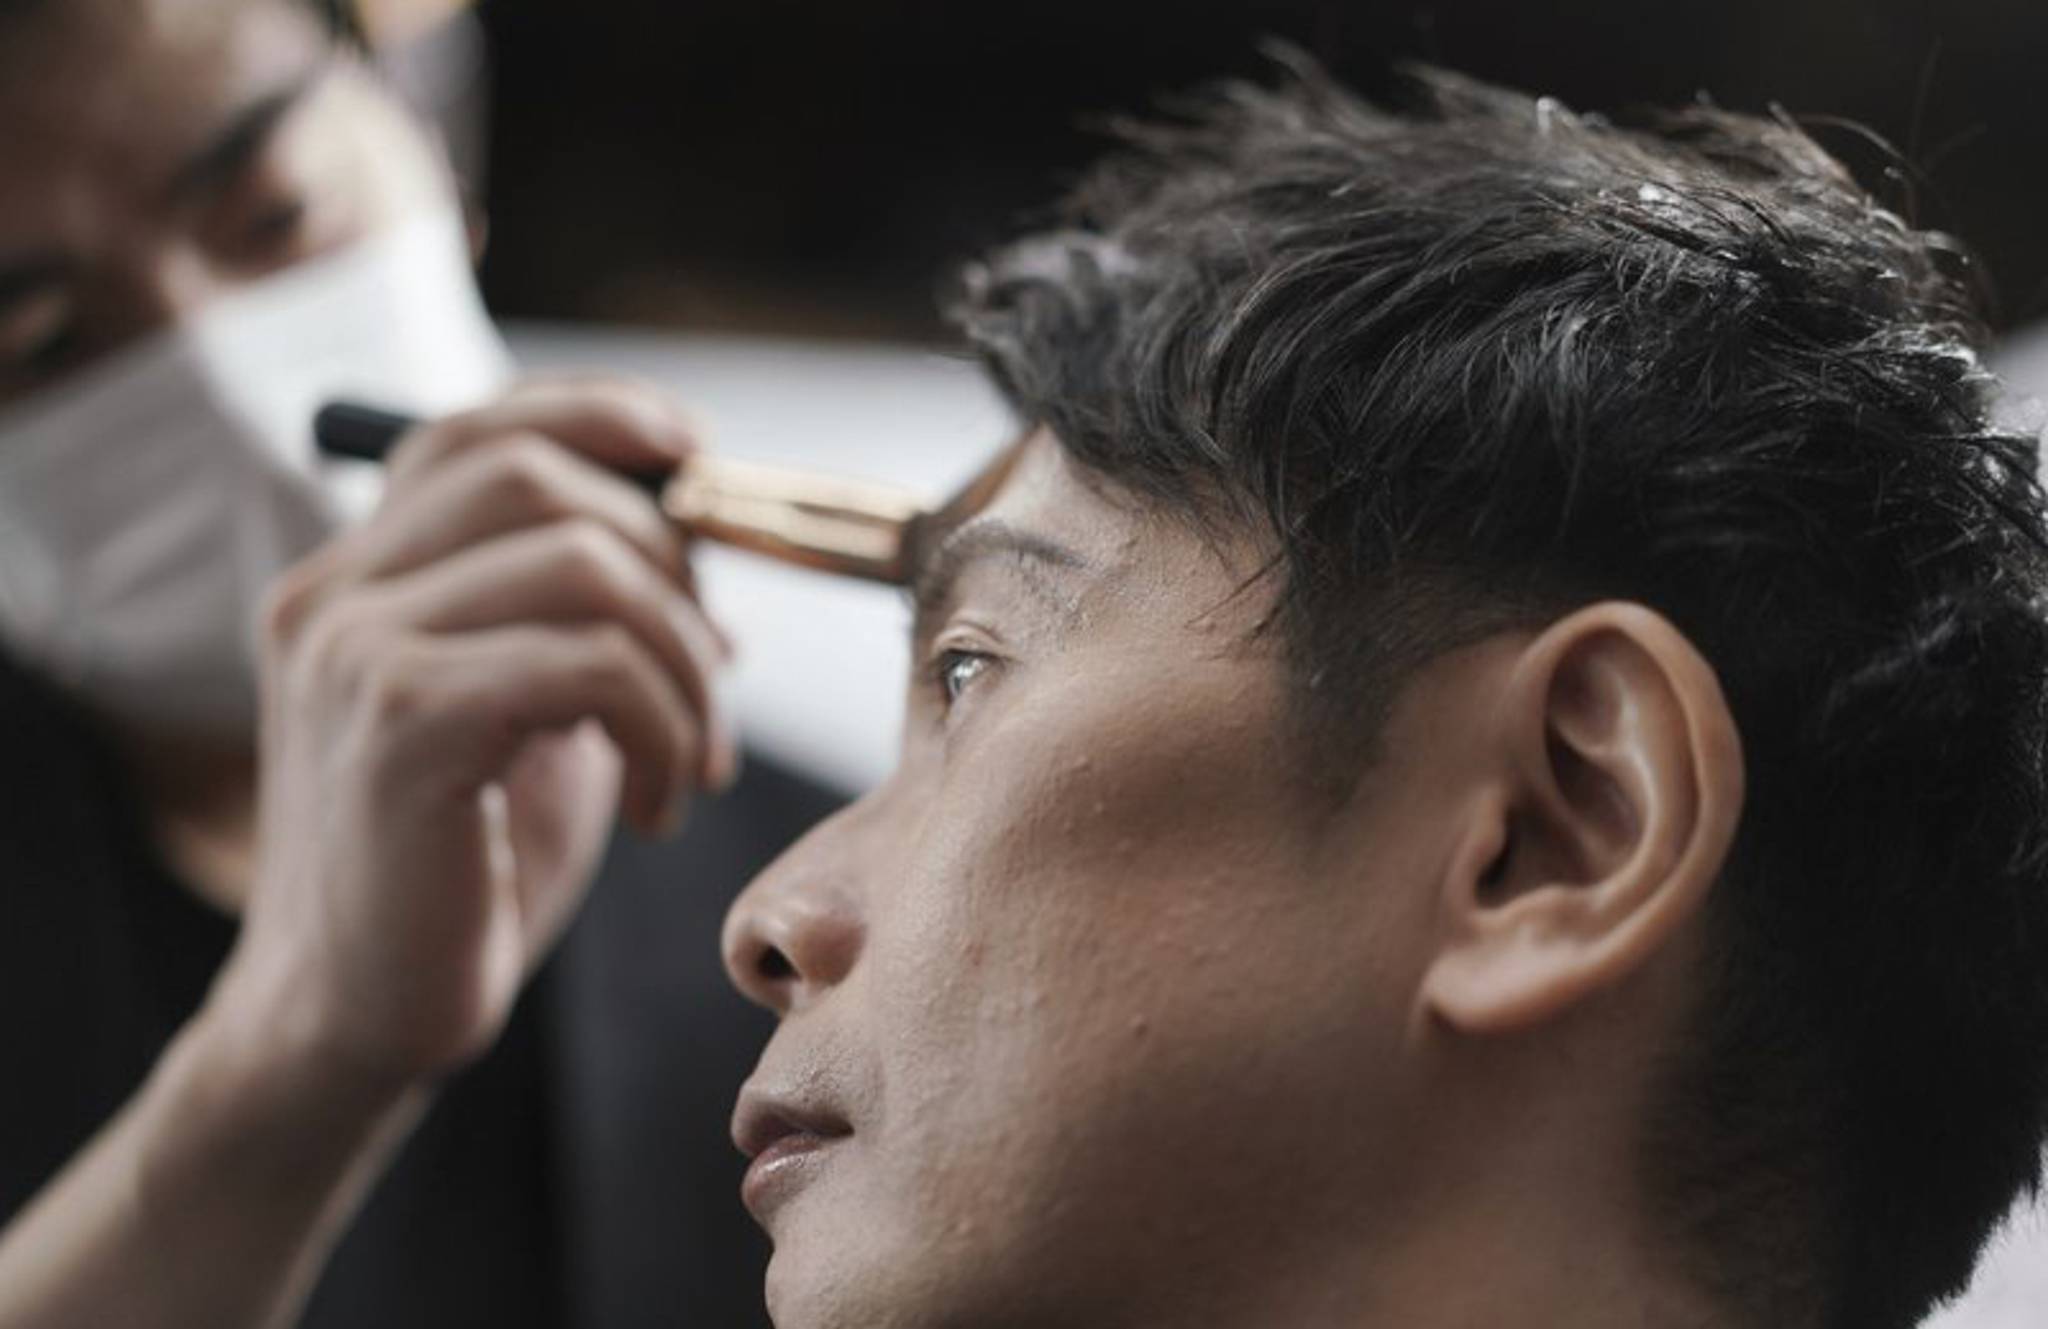 Japanese men are donning make-up to lift self-esteem